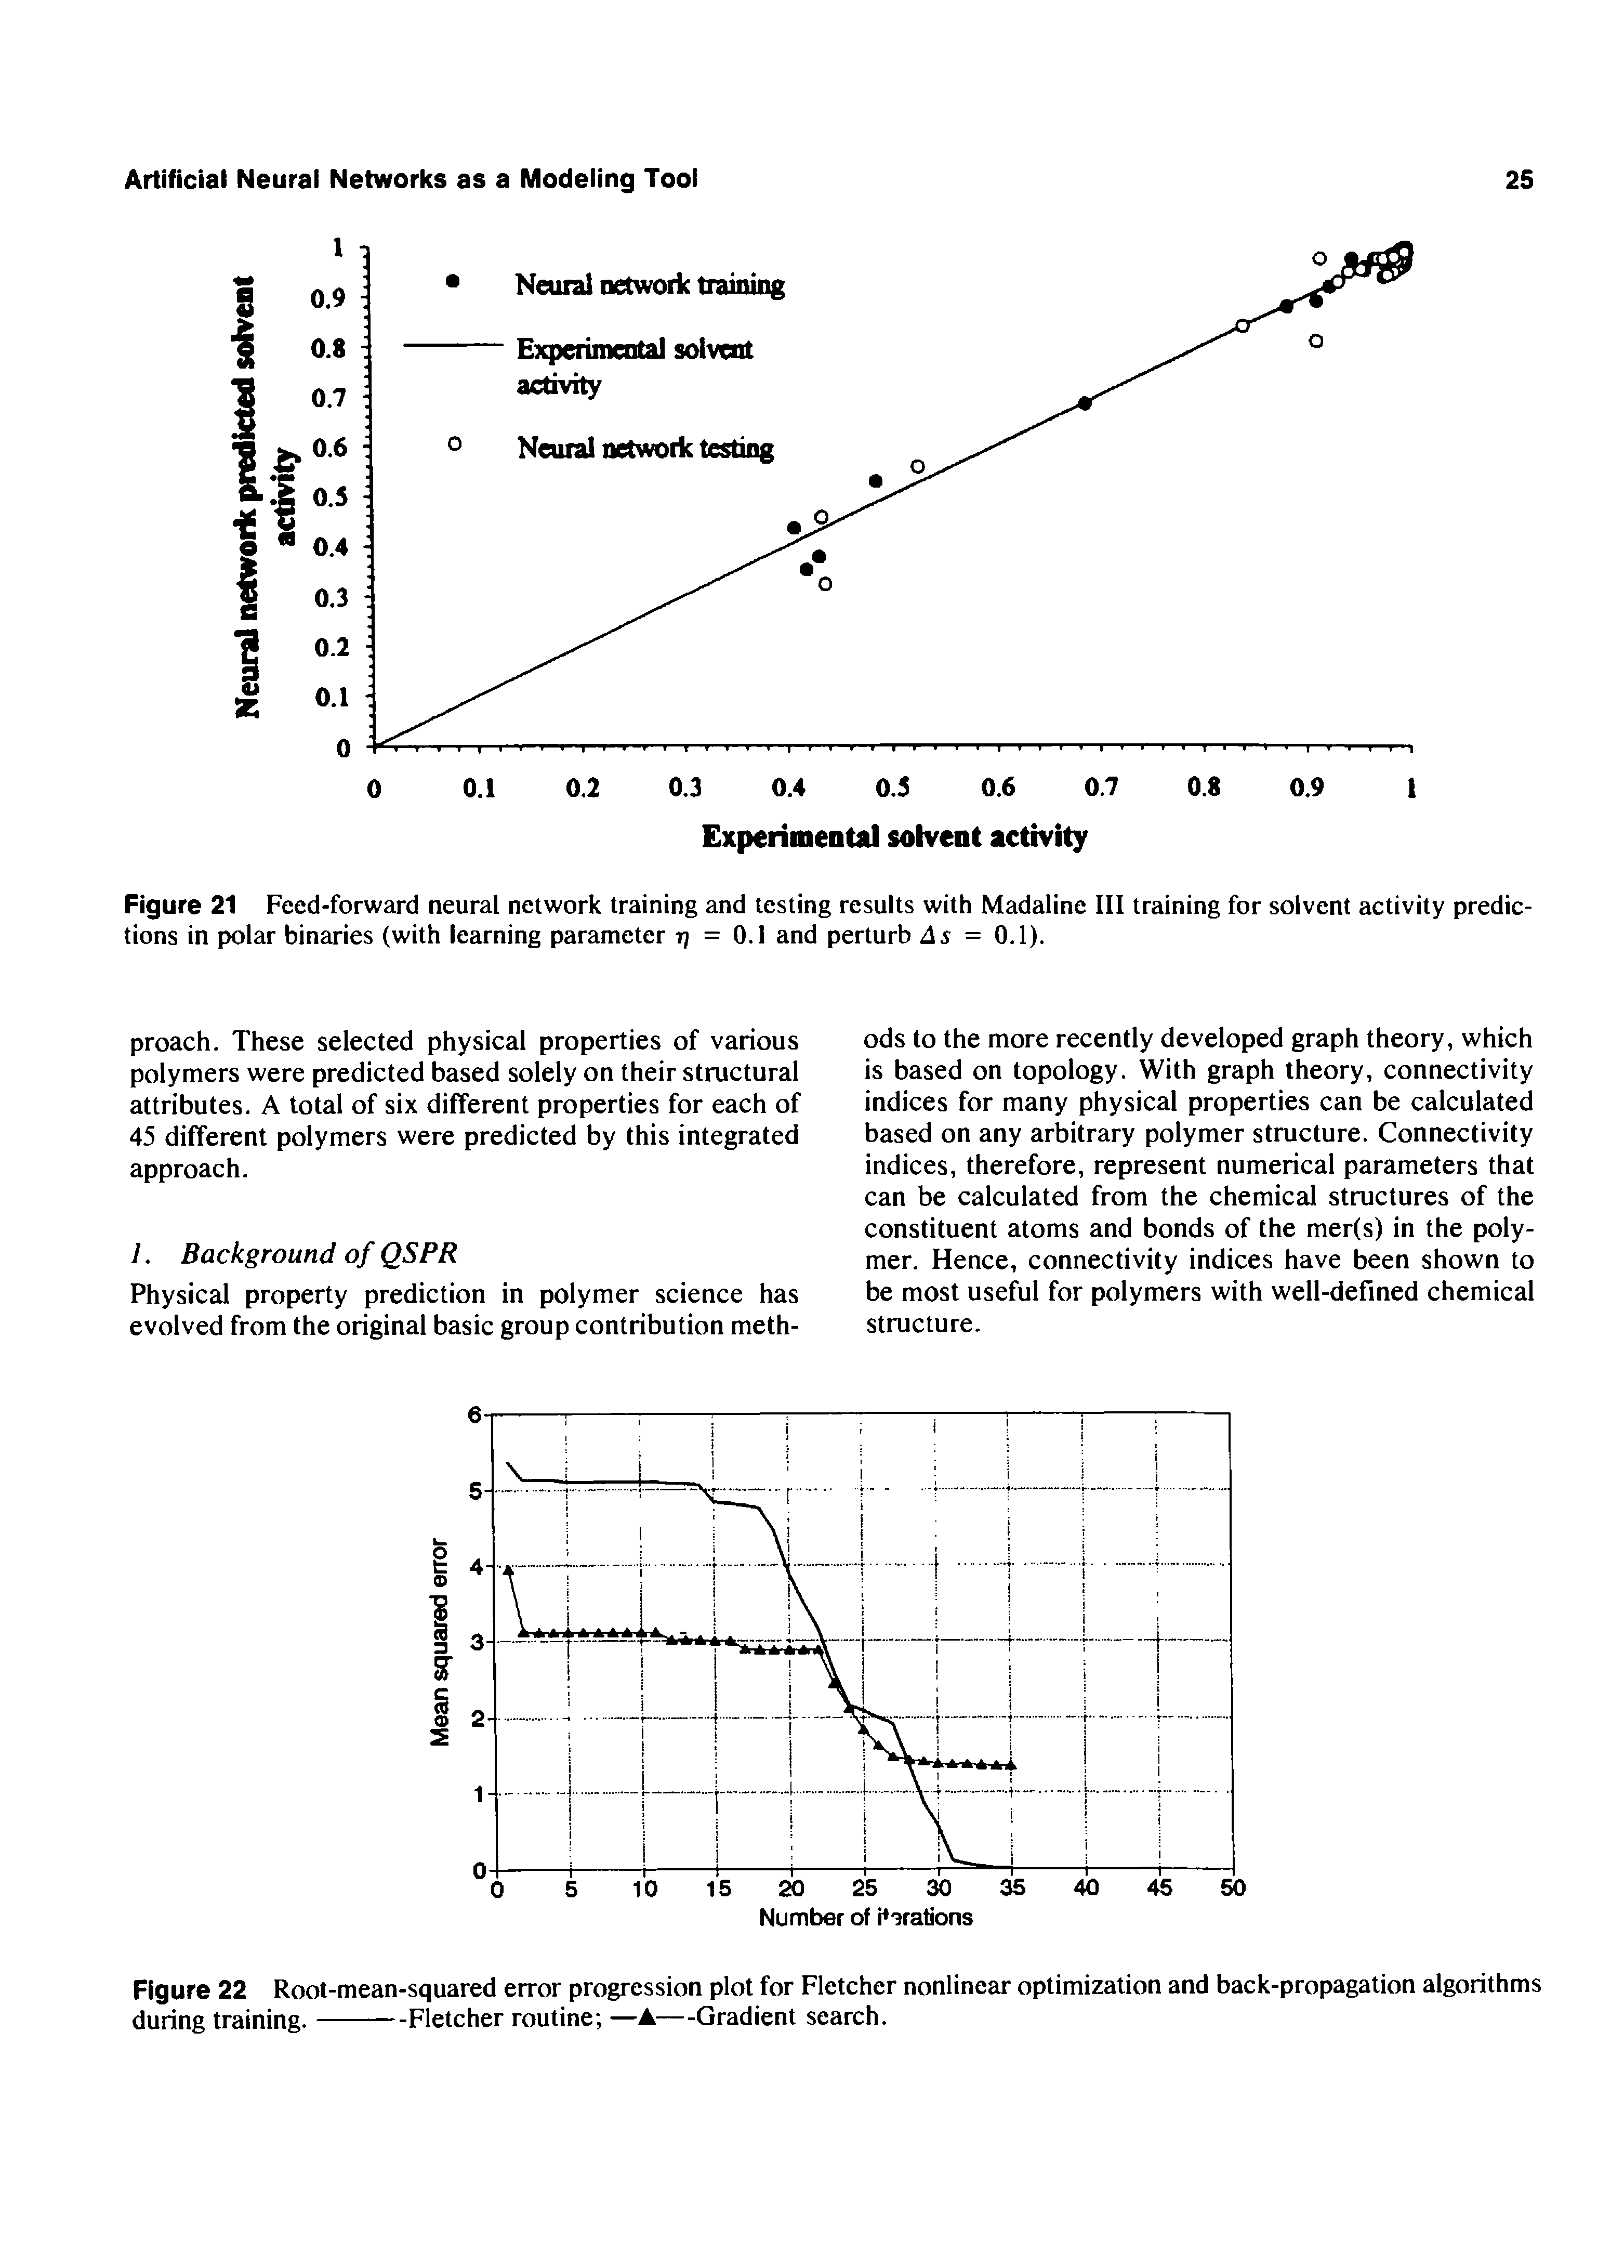 Figure 21 Feed-forward neural network training and testing results with Madaline III training for solvent activity predictions in polar binaries (with learning parameter 77 = 0.1 and perturb As = 0.1).